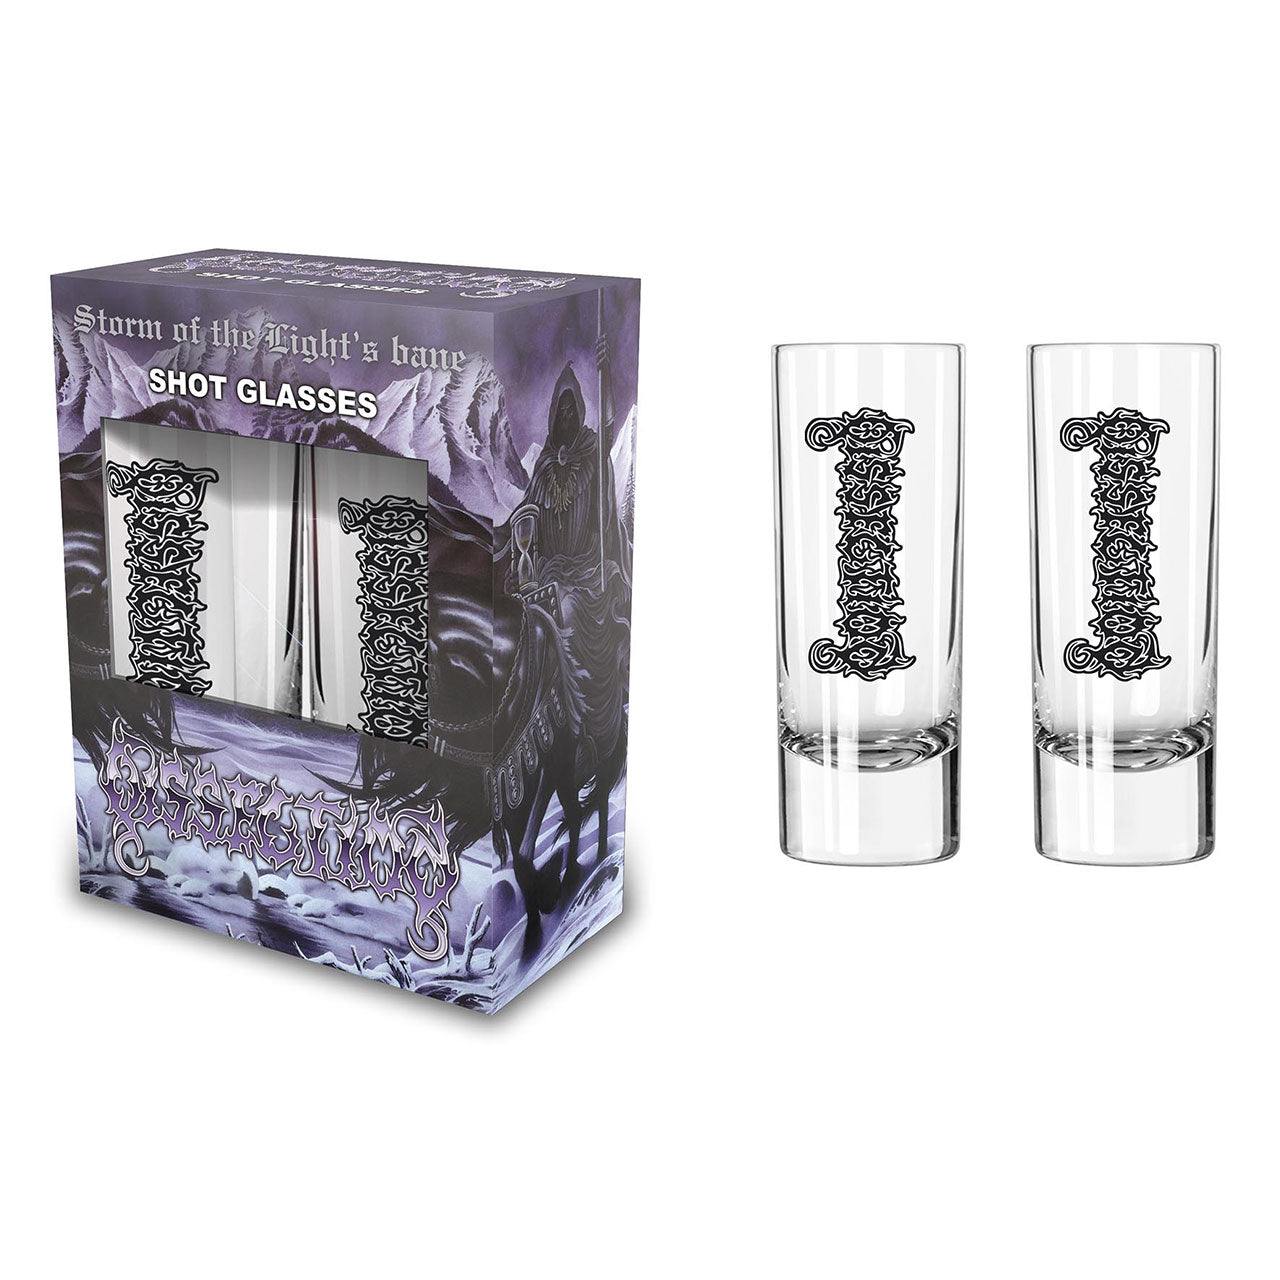 Dissection - Storm of the Light's Bane (Shot Glass Set)